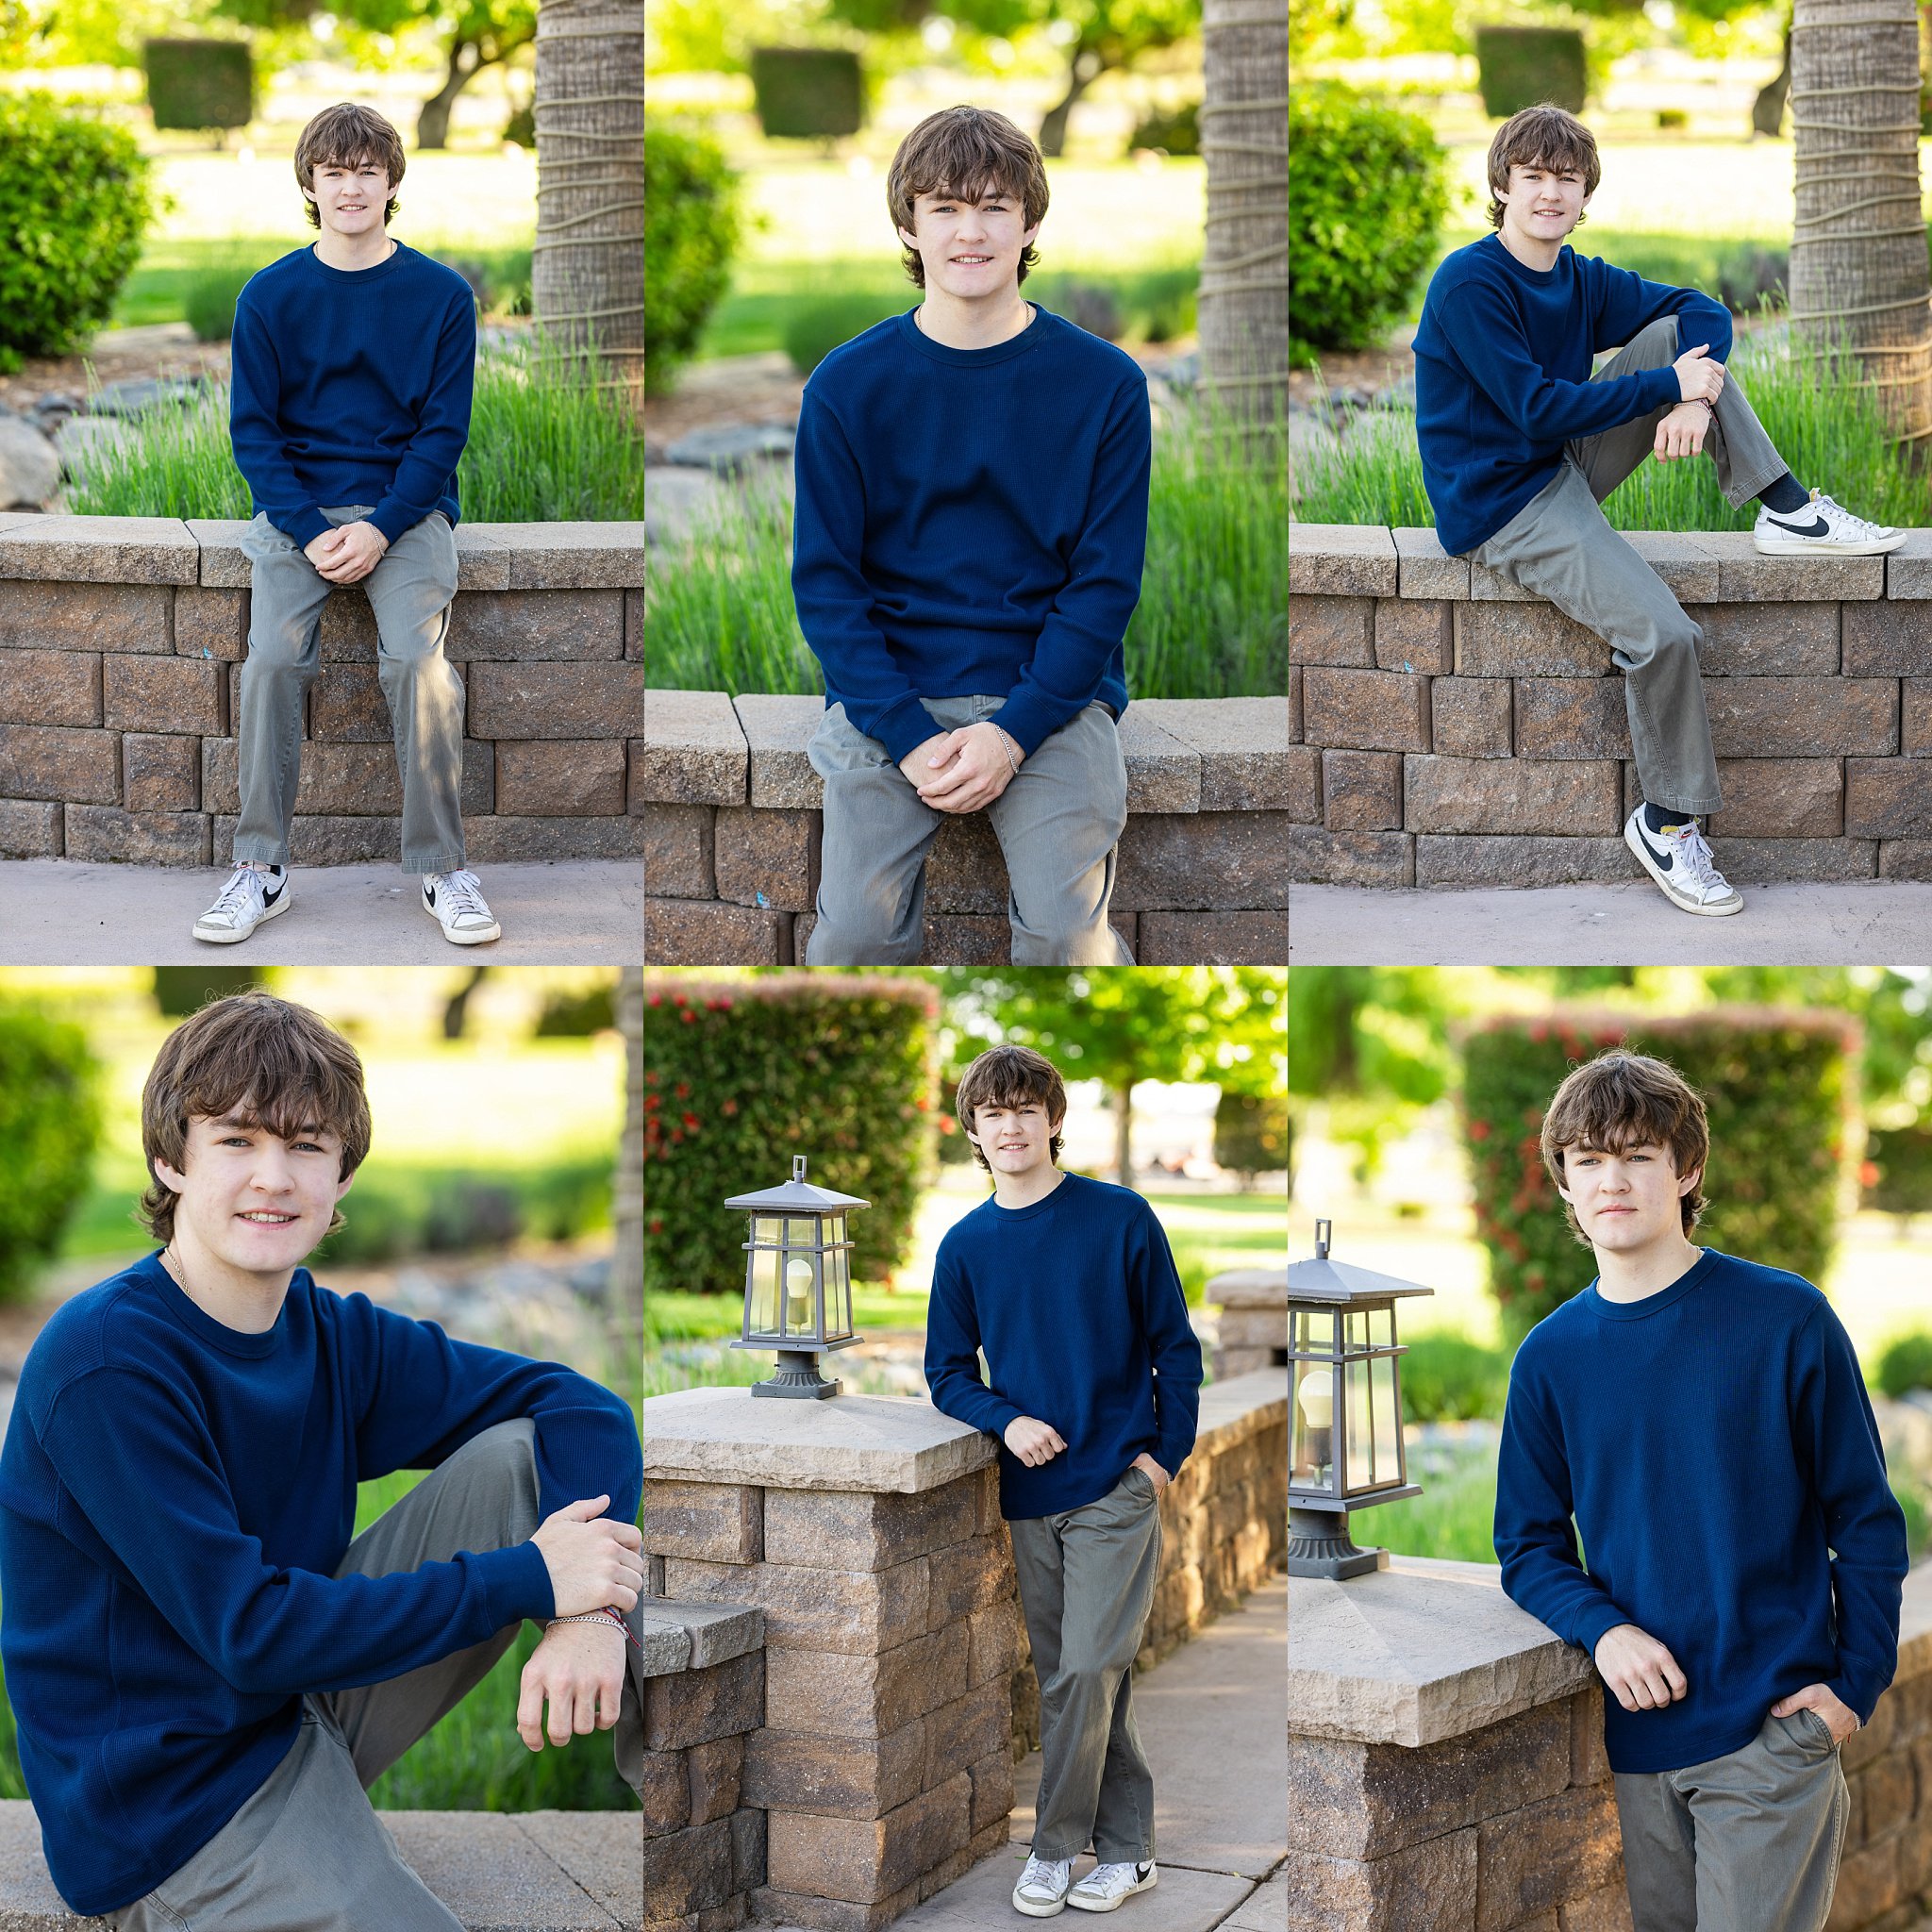 Nature's Canvas: Austin's Senior Session at Wolfe Heights Winery
What a blast it was capturing Austin&rsquo;s senior session! Austin's relaxed and easygoing demeanor brought a wonderful vibe to the shoot, and I'm absolutely thrilled with how his imag